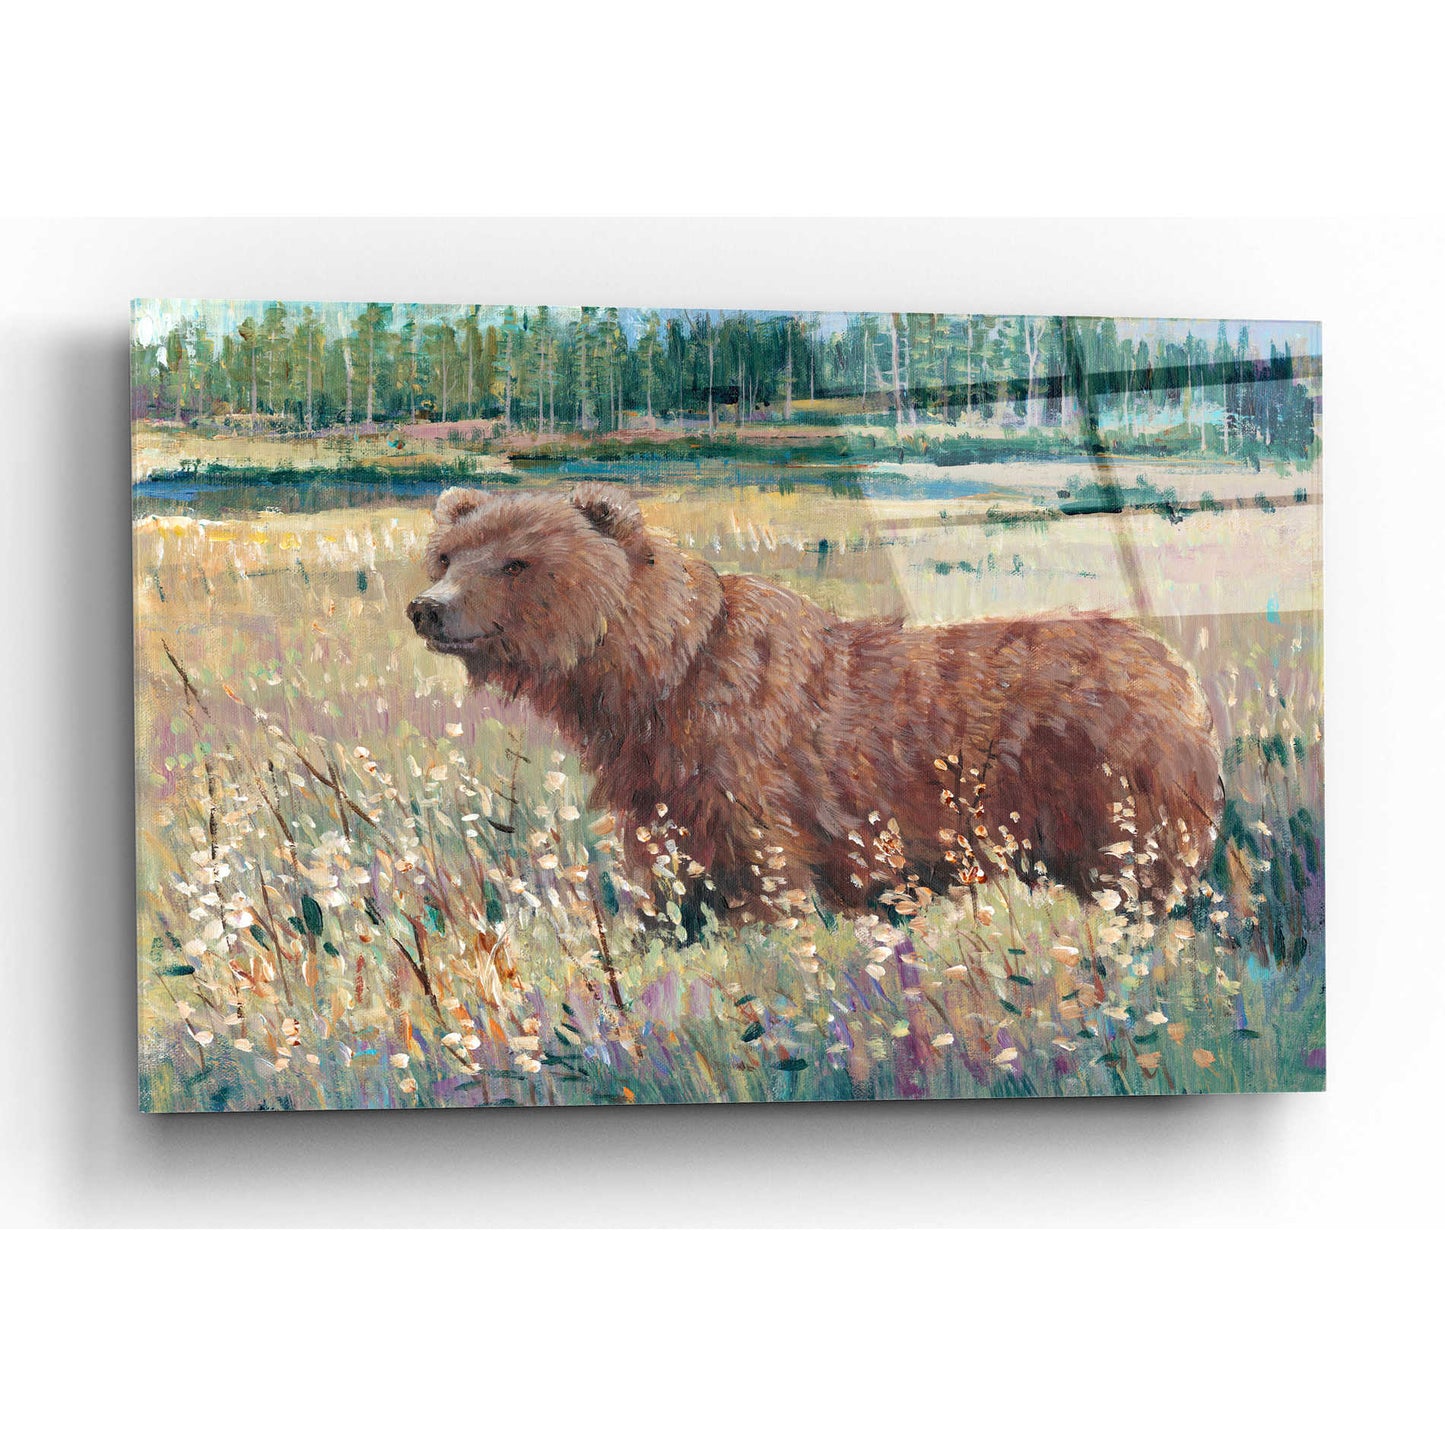 Epic Art 'Bear in the Field' by Tim O'Toole, Acrylic Glass Wall Art